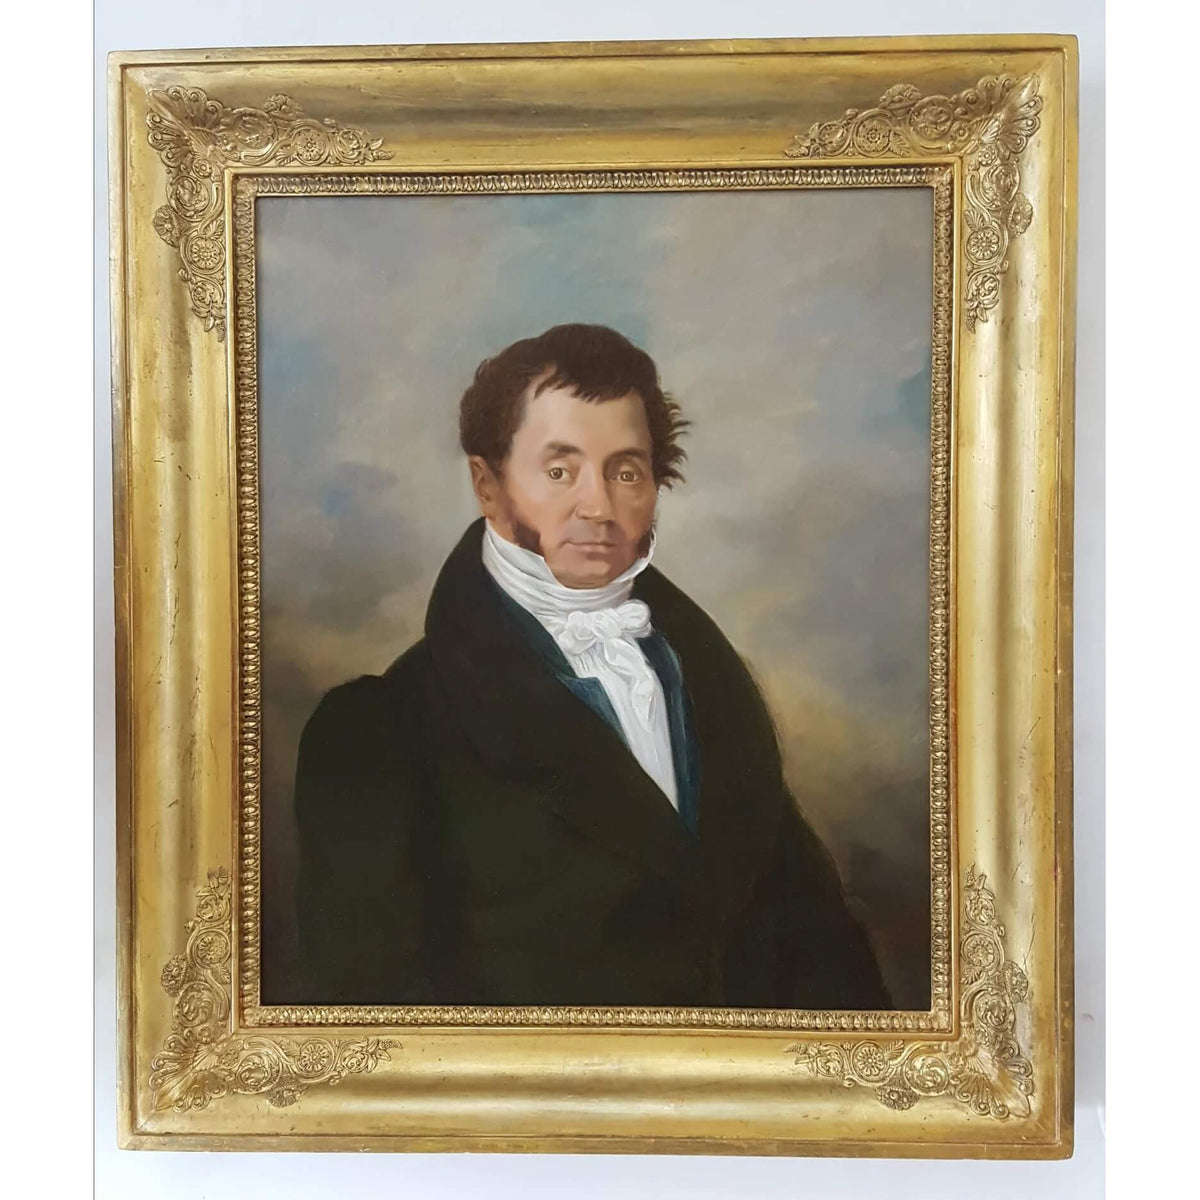 Antique portrait oil painting merchant with an elegant suit 19th century French school for sale at Winckelmann Gallery